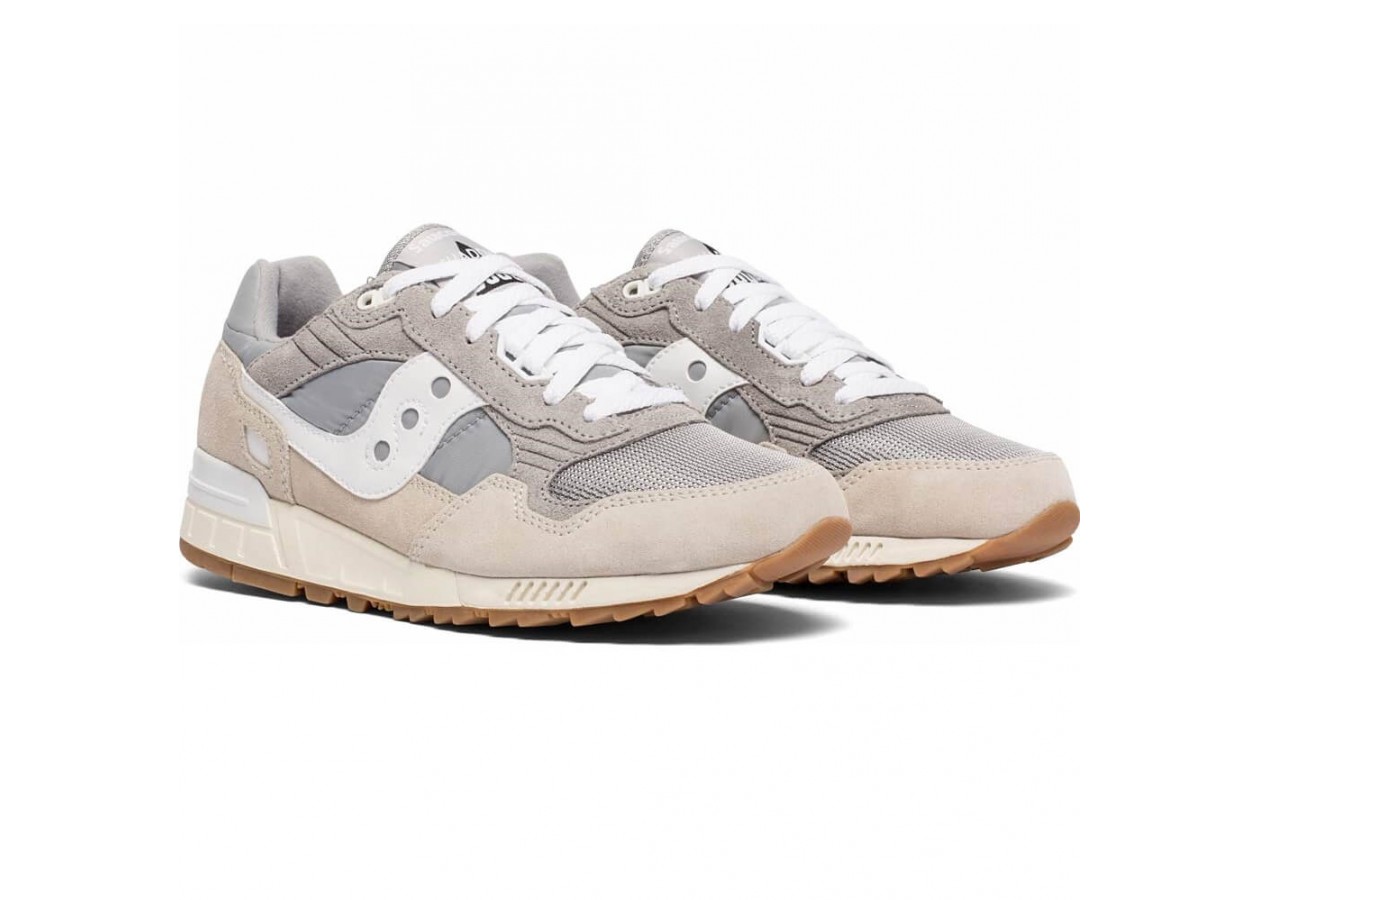 The Saucony Shadow 5000 offers a nice design offered in multiple color options for individual styles.